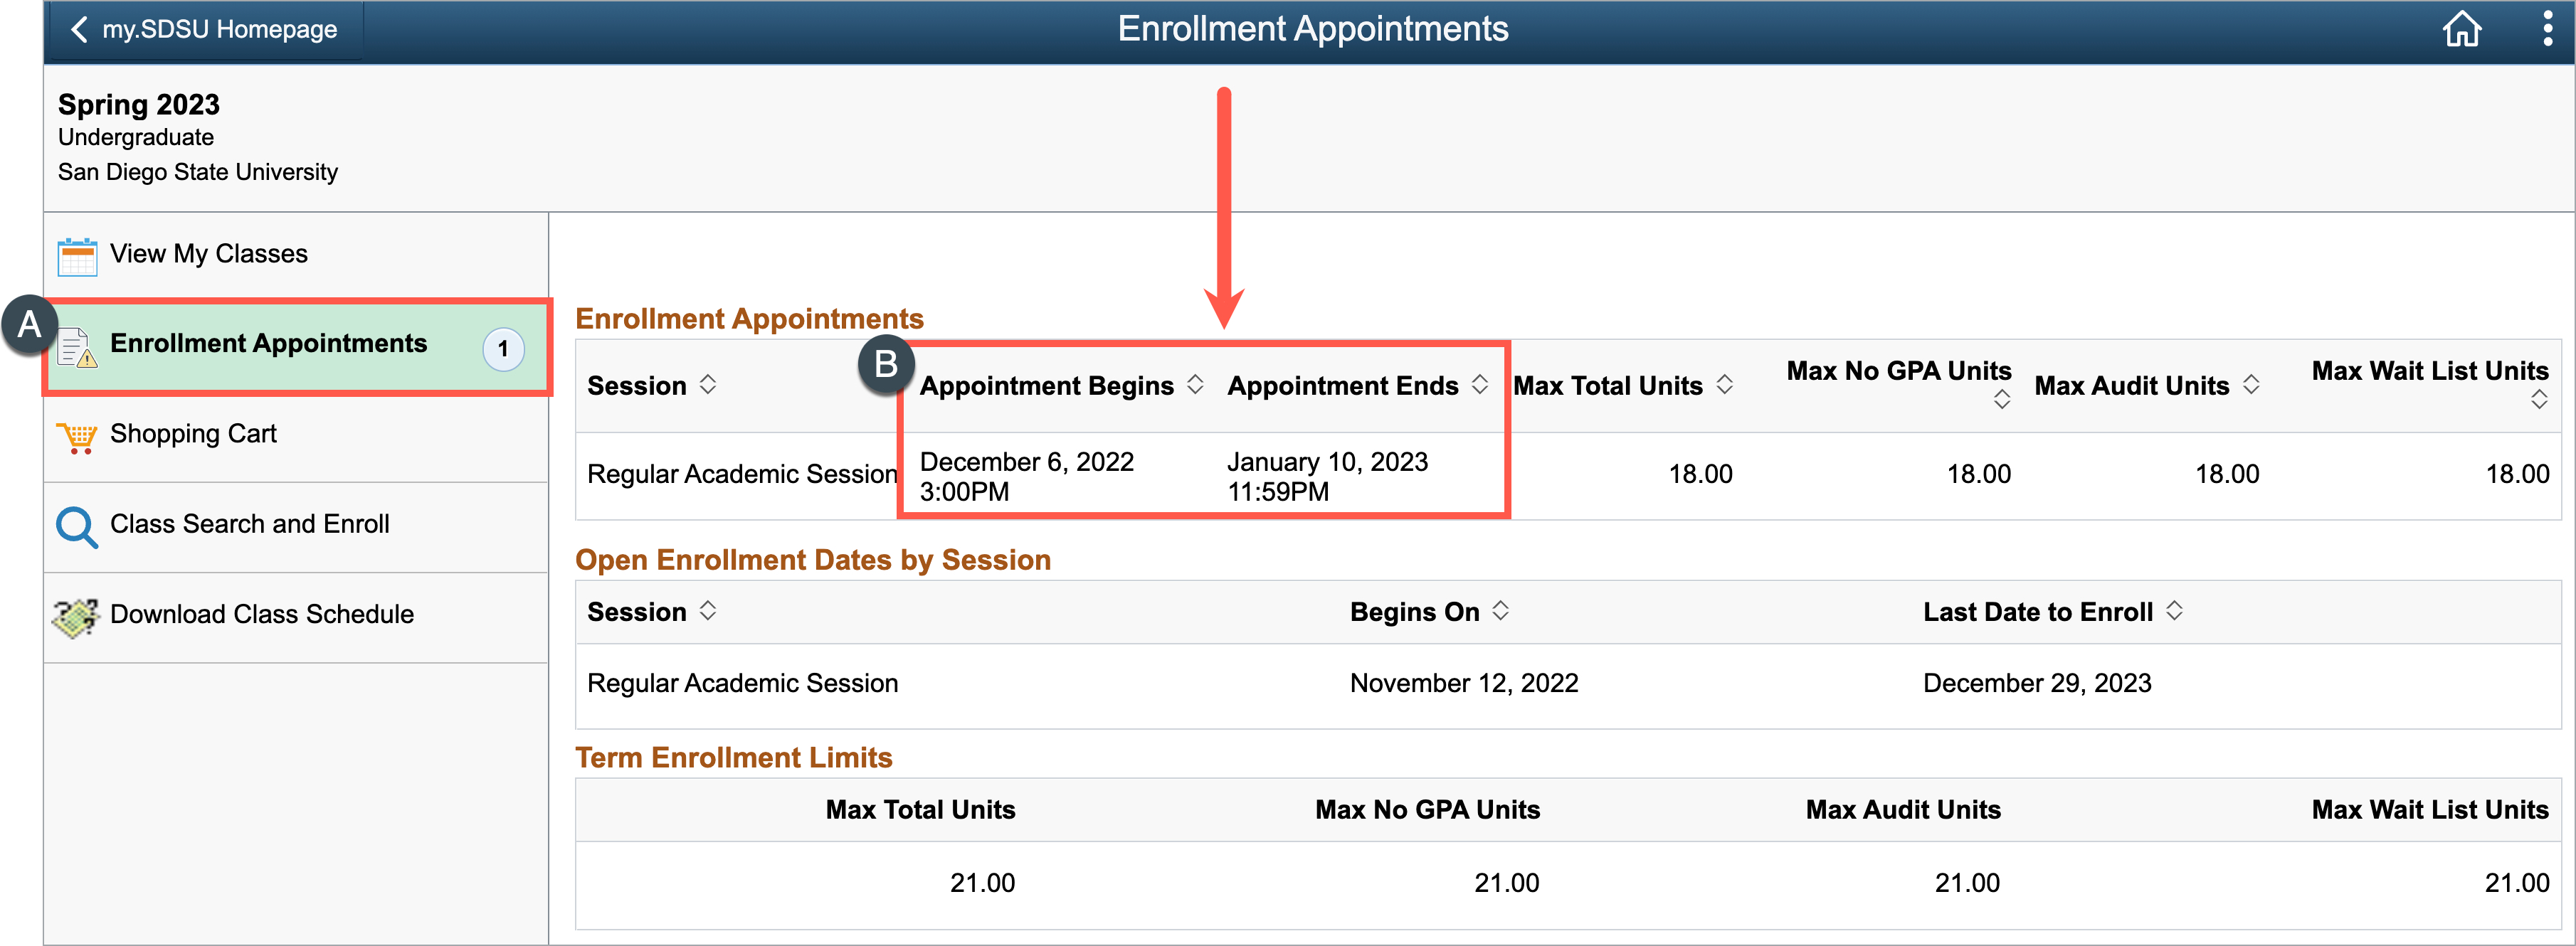 Enrollment Appointments screen showing enrollment appointments, open enrollment dates by session, and term enrollment limits.